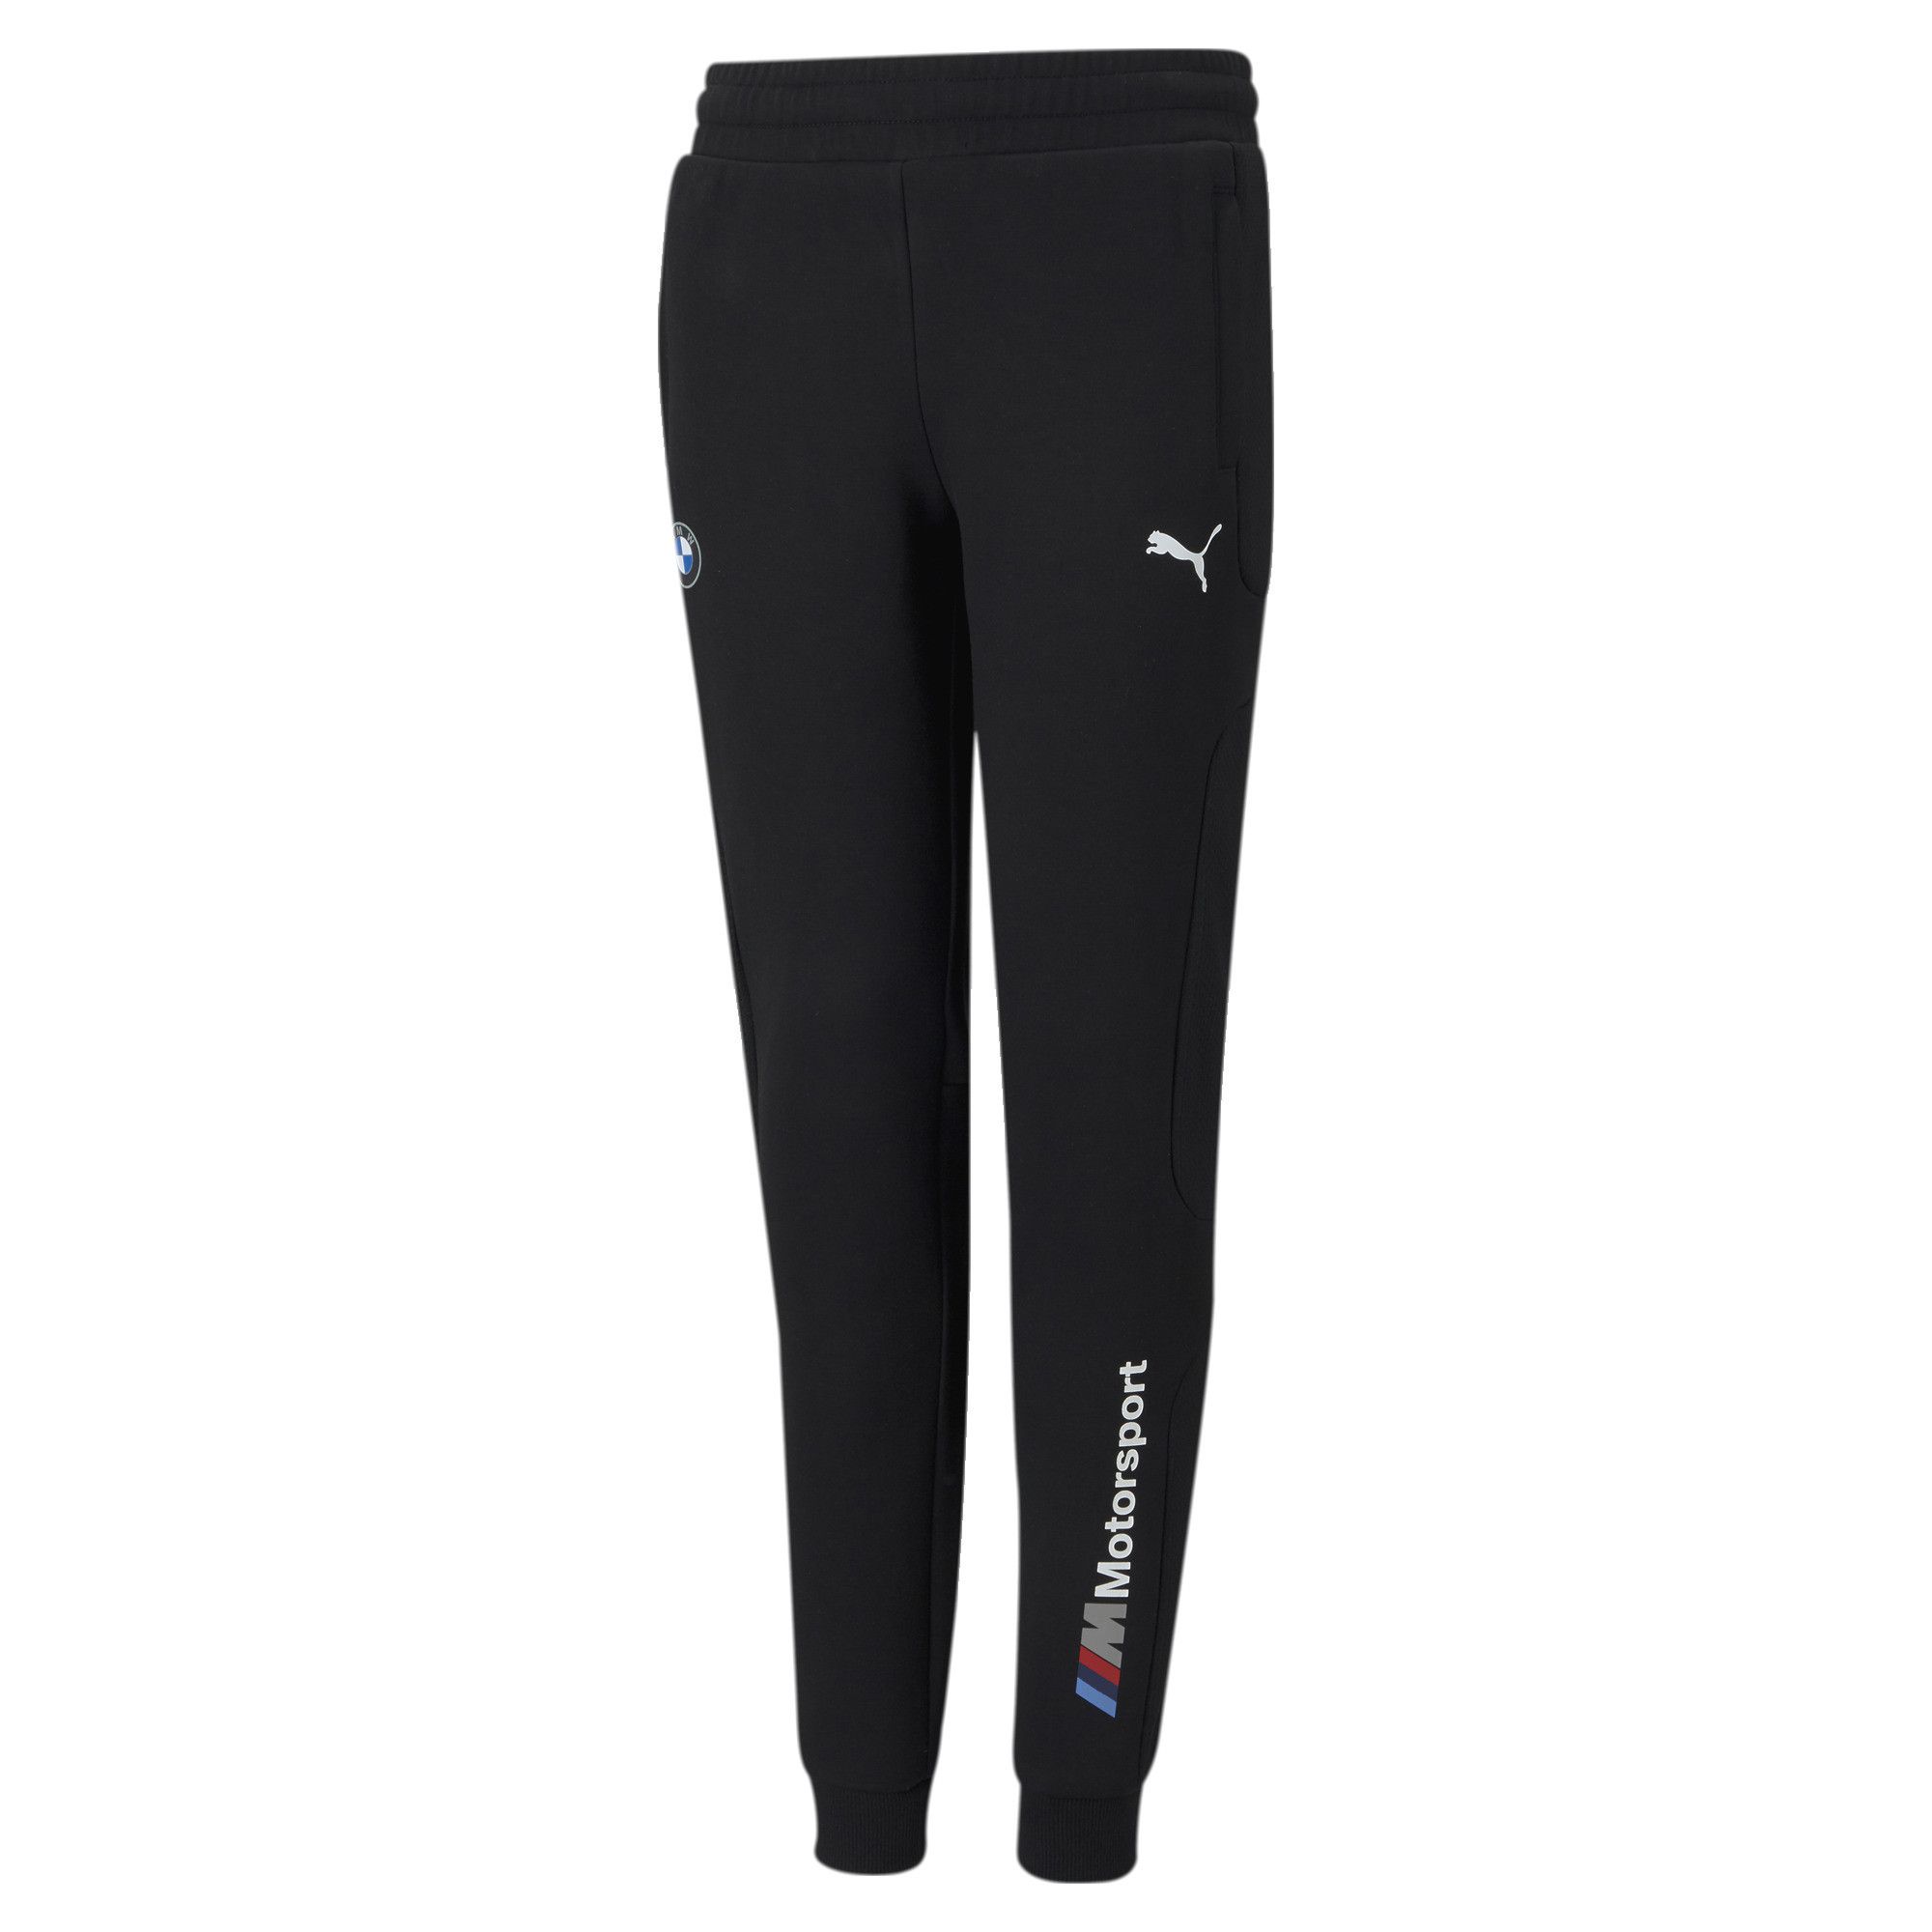  Functional, comfortable and stylishly cool. Iconic BMW M Motorsport branding combine with structured surface panels and an articulated fit to give these double knit, slim-fit sweat pants a sleek look while keeping you warm and snug. FEATURES & BENEFITS By buying cotton products from PUMA, you’re supporting more sustainable cotton farming.  DETAILS Slim fitElasticated waistband and ribbed cuffsSide zip pocketMotorsport-inspired fabric panels in sidesArticulated design for increased comfort and movementVertical BMW M Motorsport logo on left legBMW Propeller print badge on right legPUMA Cat Logo print on left legCotton and polyester